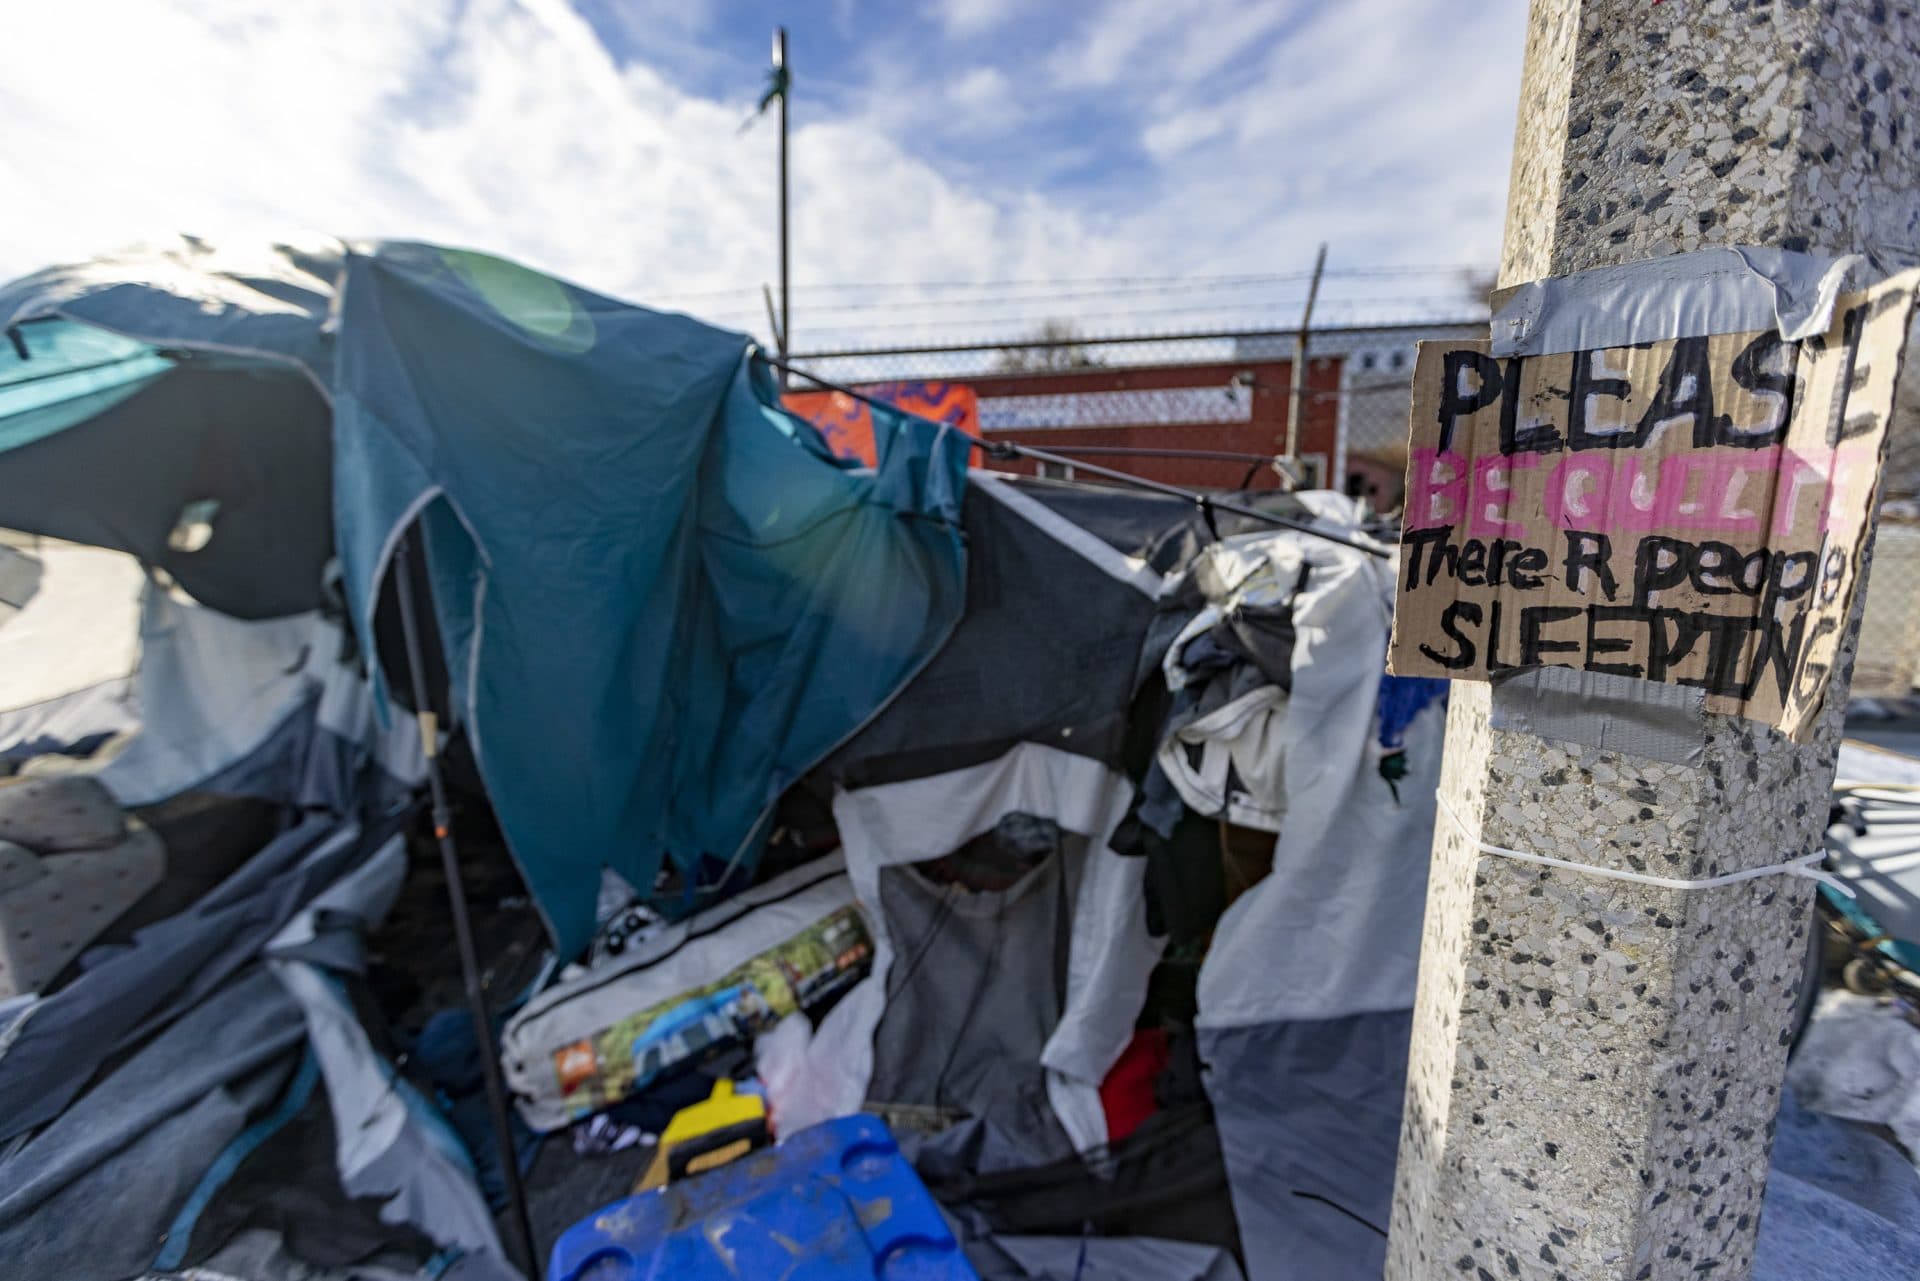 A sign that reads, “Please be quiet there R people sleeping” hangs on a lamp post in front of one of the last tents remaining in the homeless encampment at the Newmarket Triangle. (Jesse Costa/WBUR)